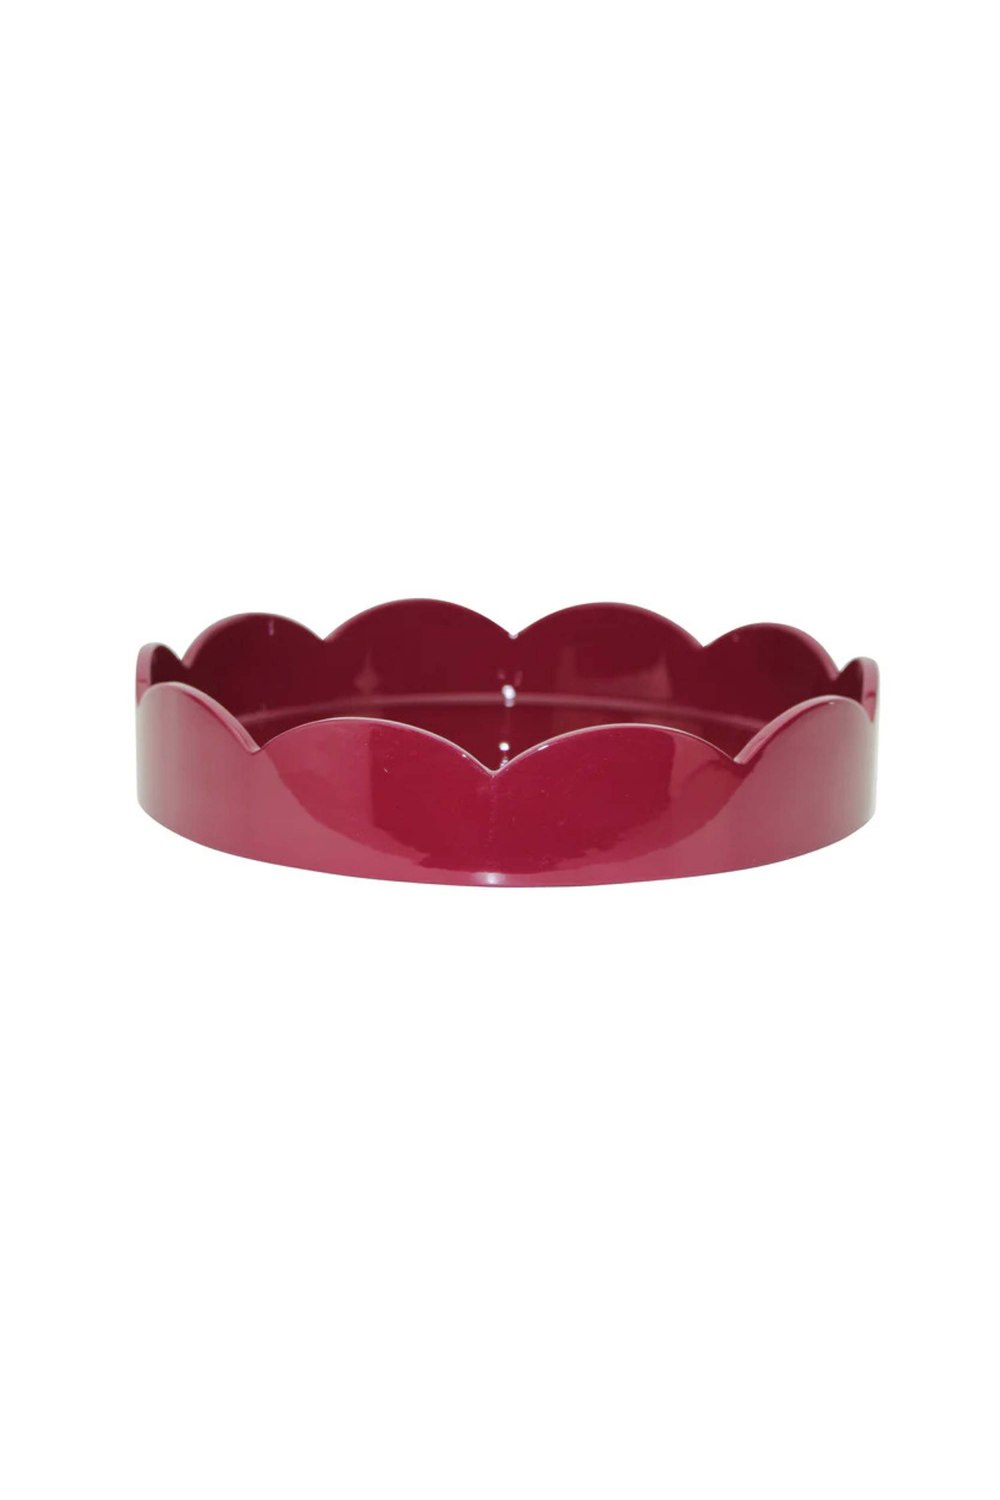 ADDISON ROSS - Cherry Red Small Round Scallop Tray